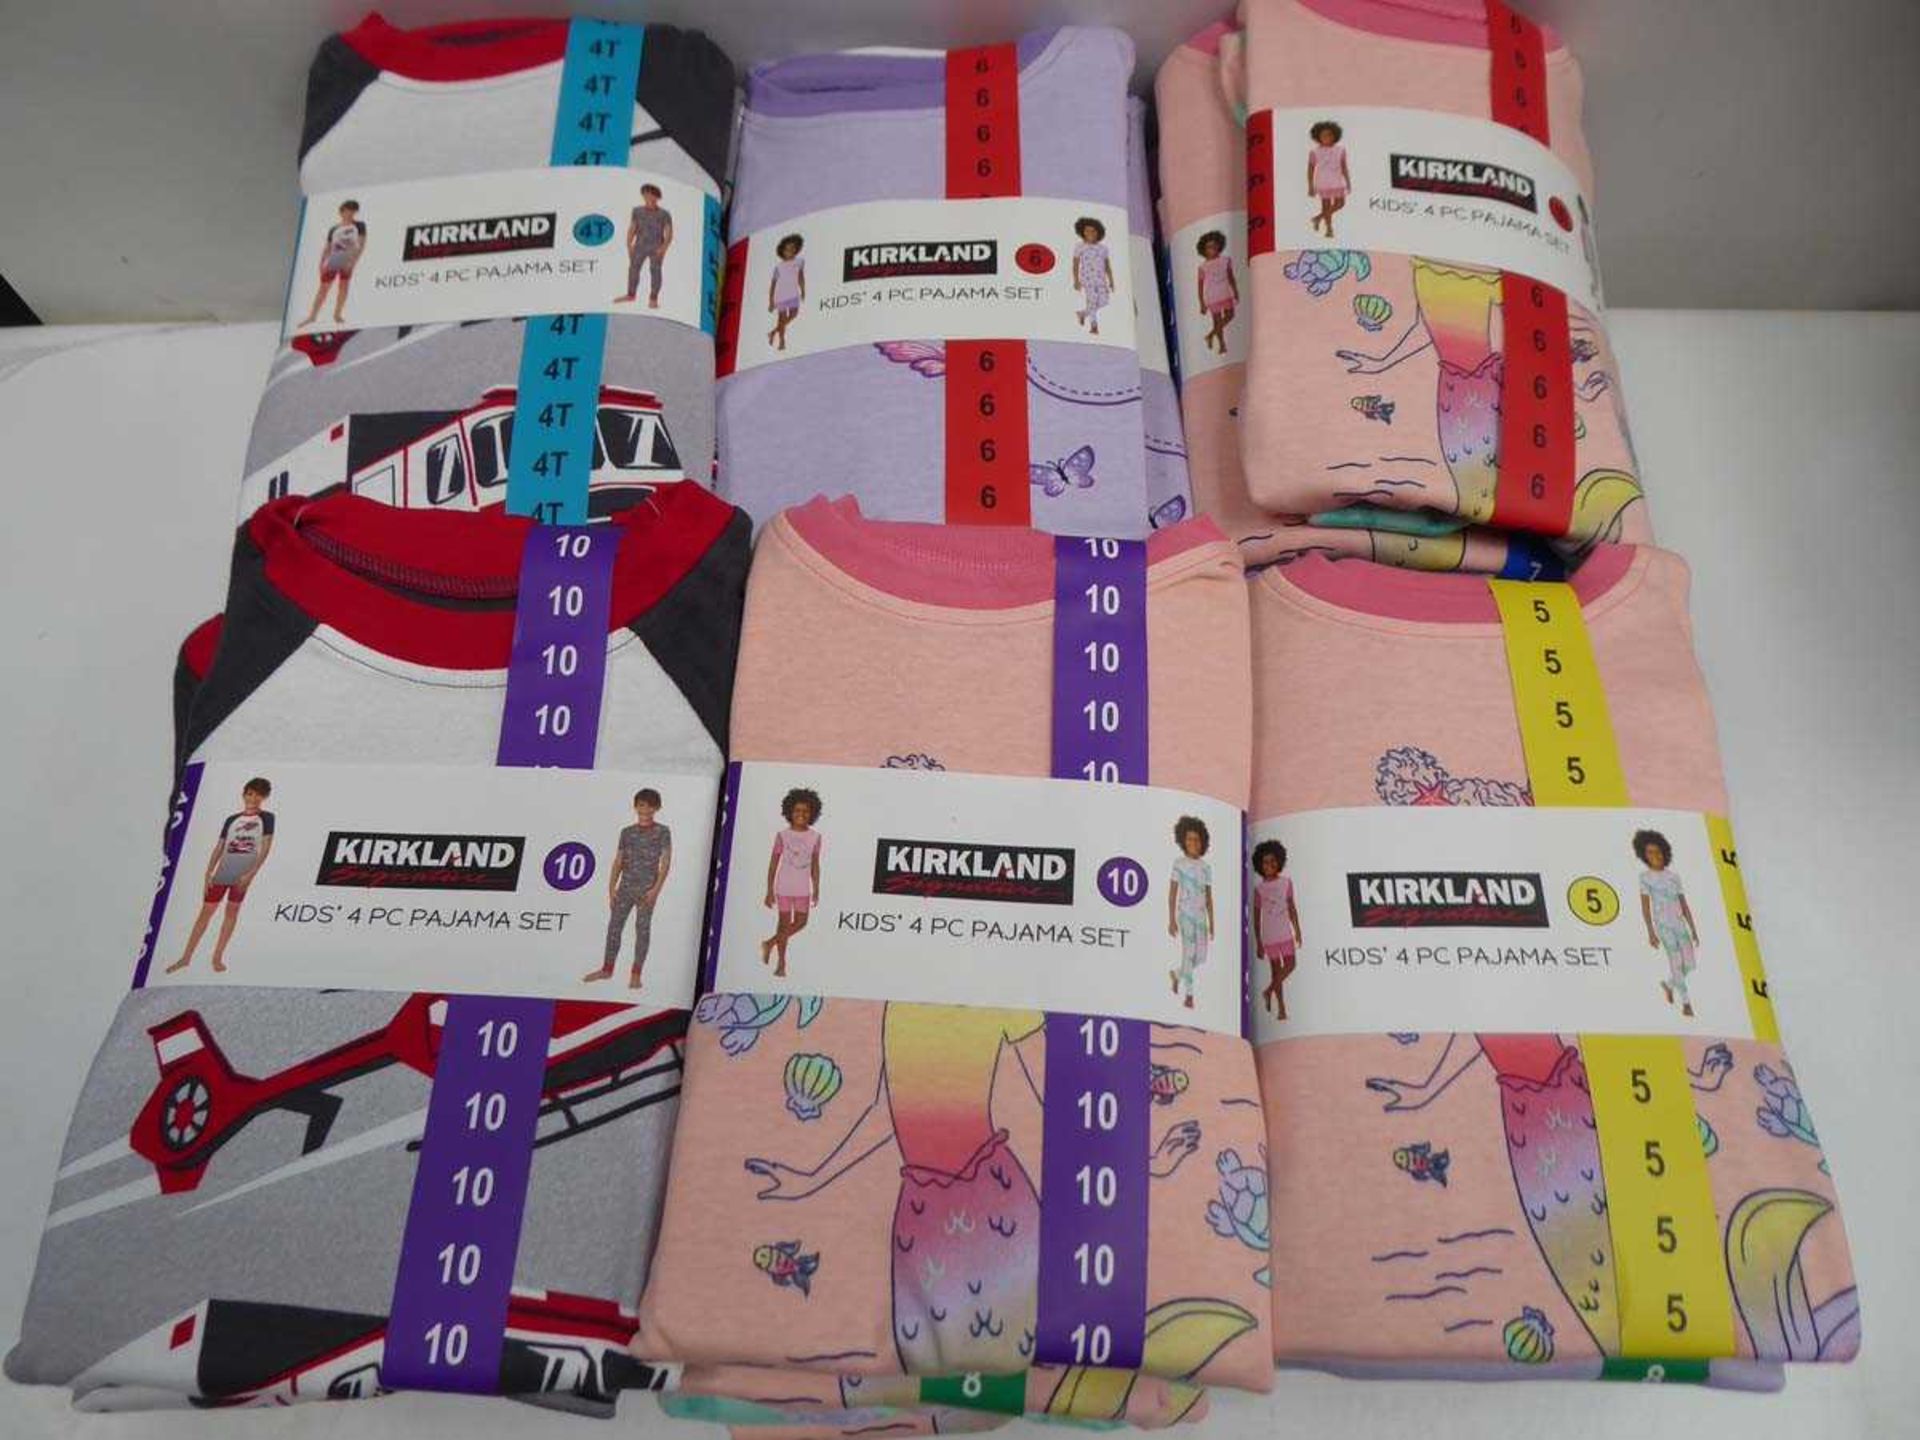 Approx. 30 Kirkland SIgnature kids 4 piece pyjama sets in various colours, sizes, and genders